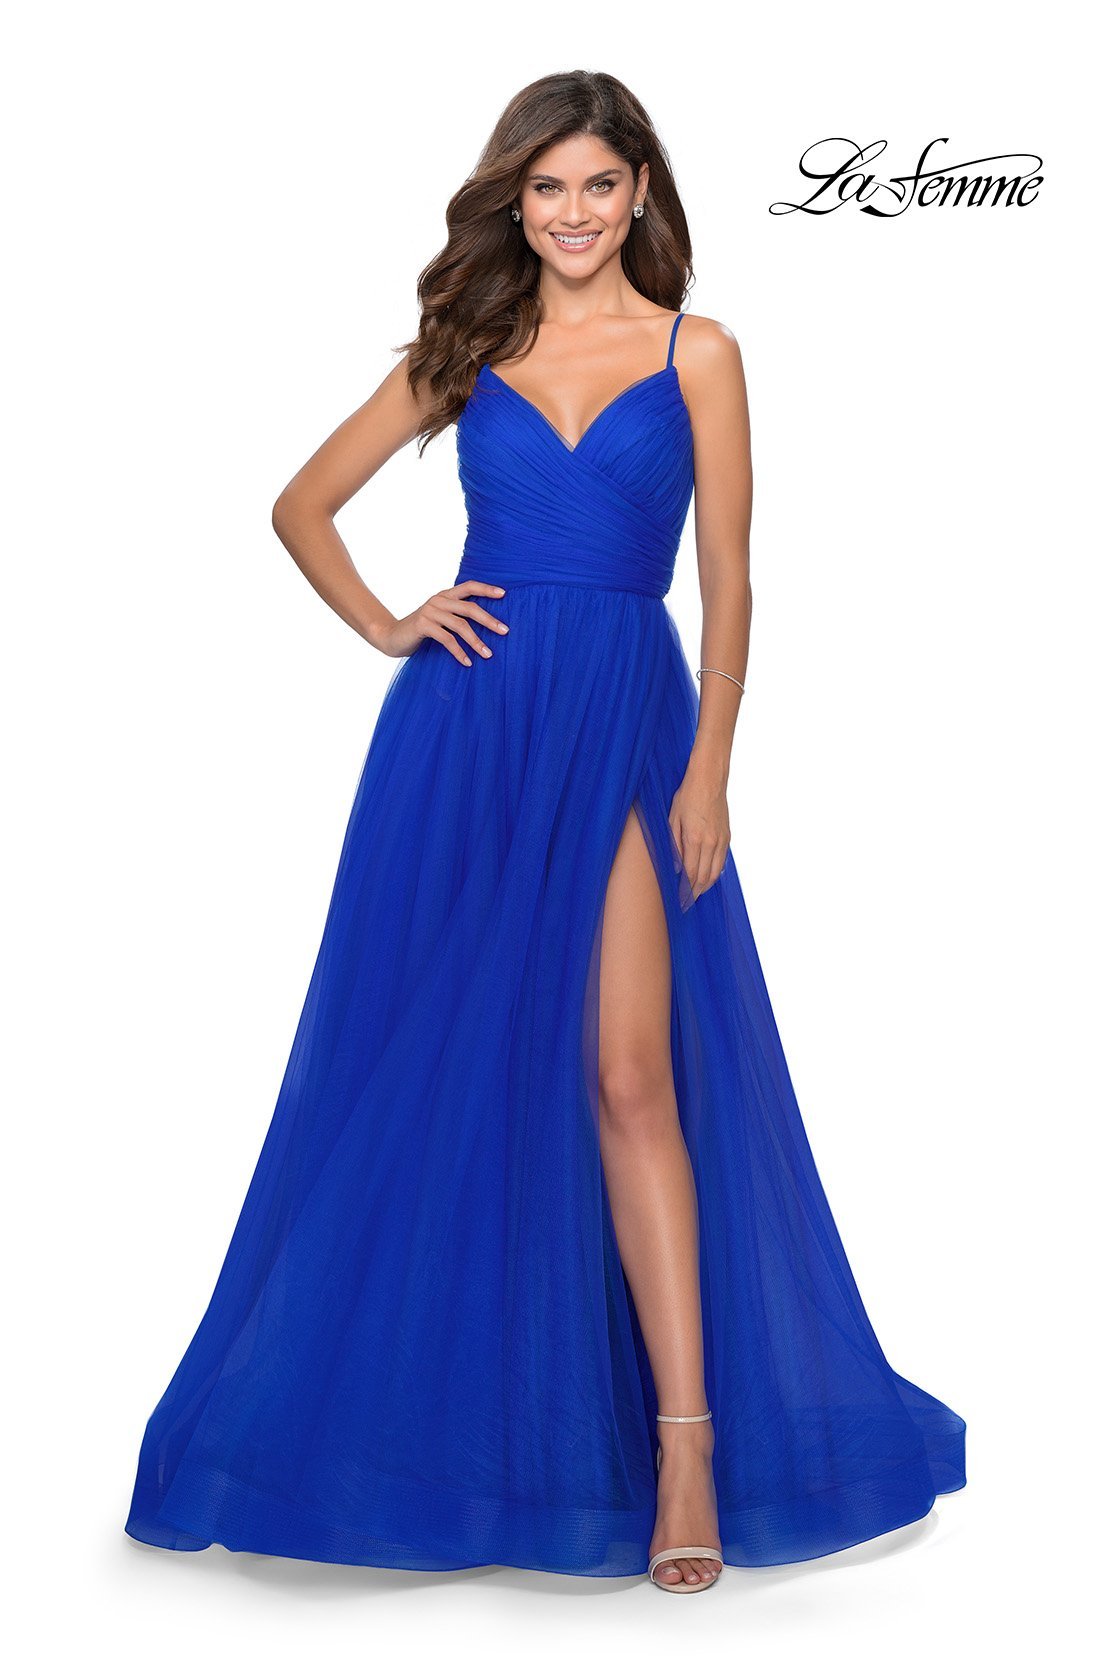 La Femme 28561 dress images in these colors: Neon Pink, Royal Blue, Yellow.